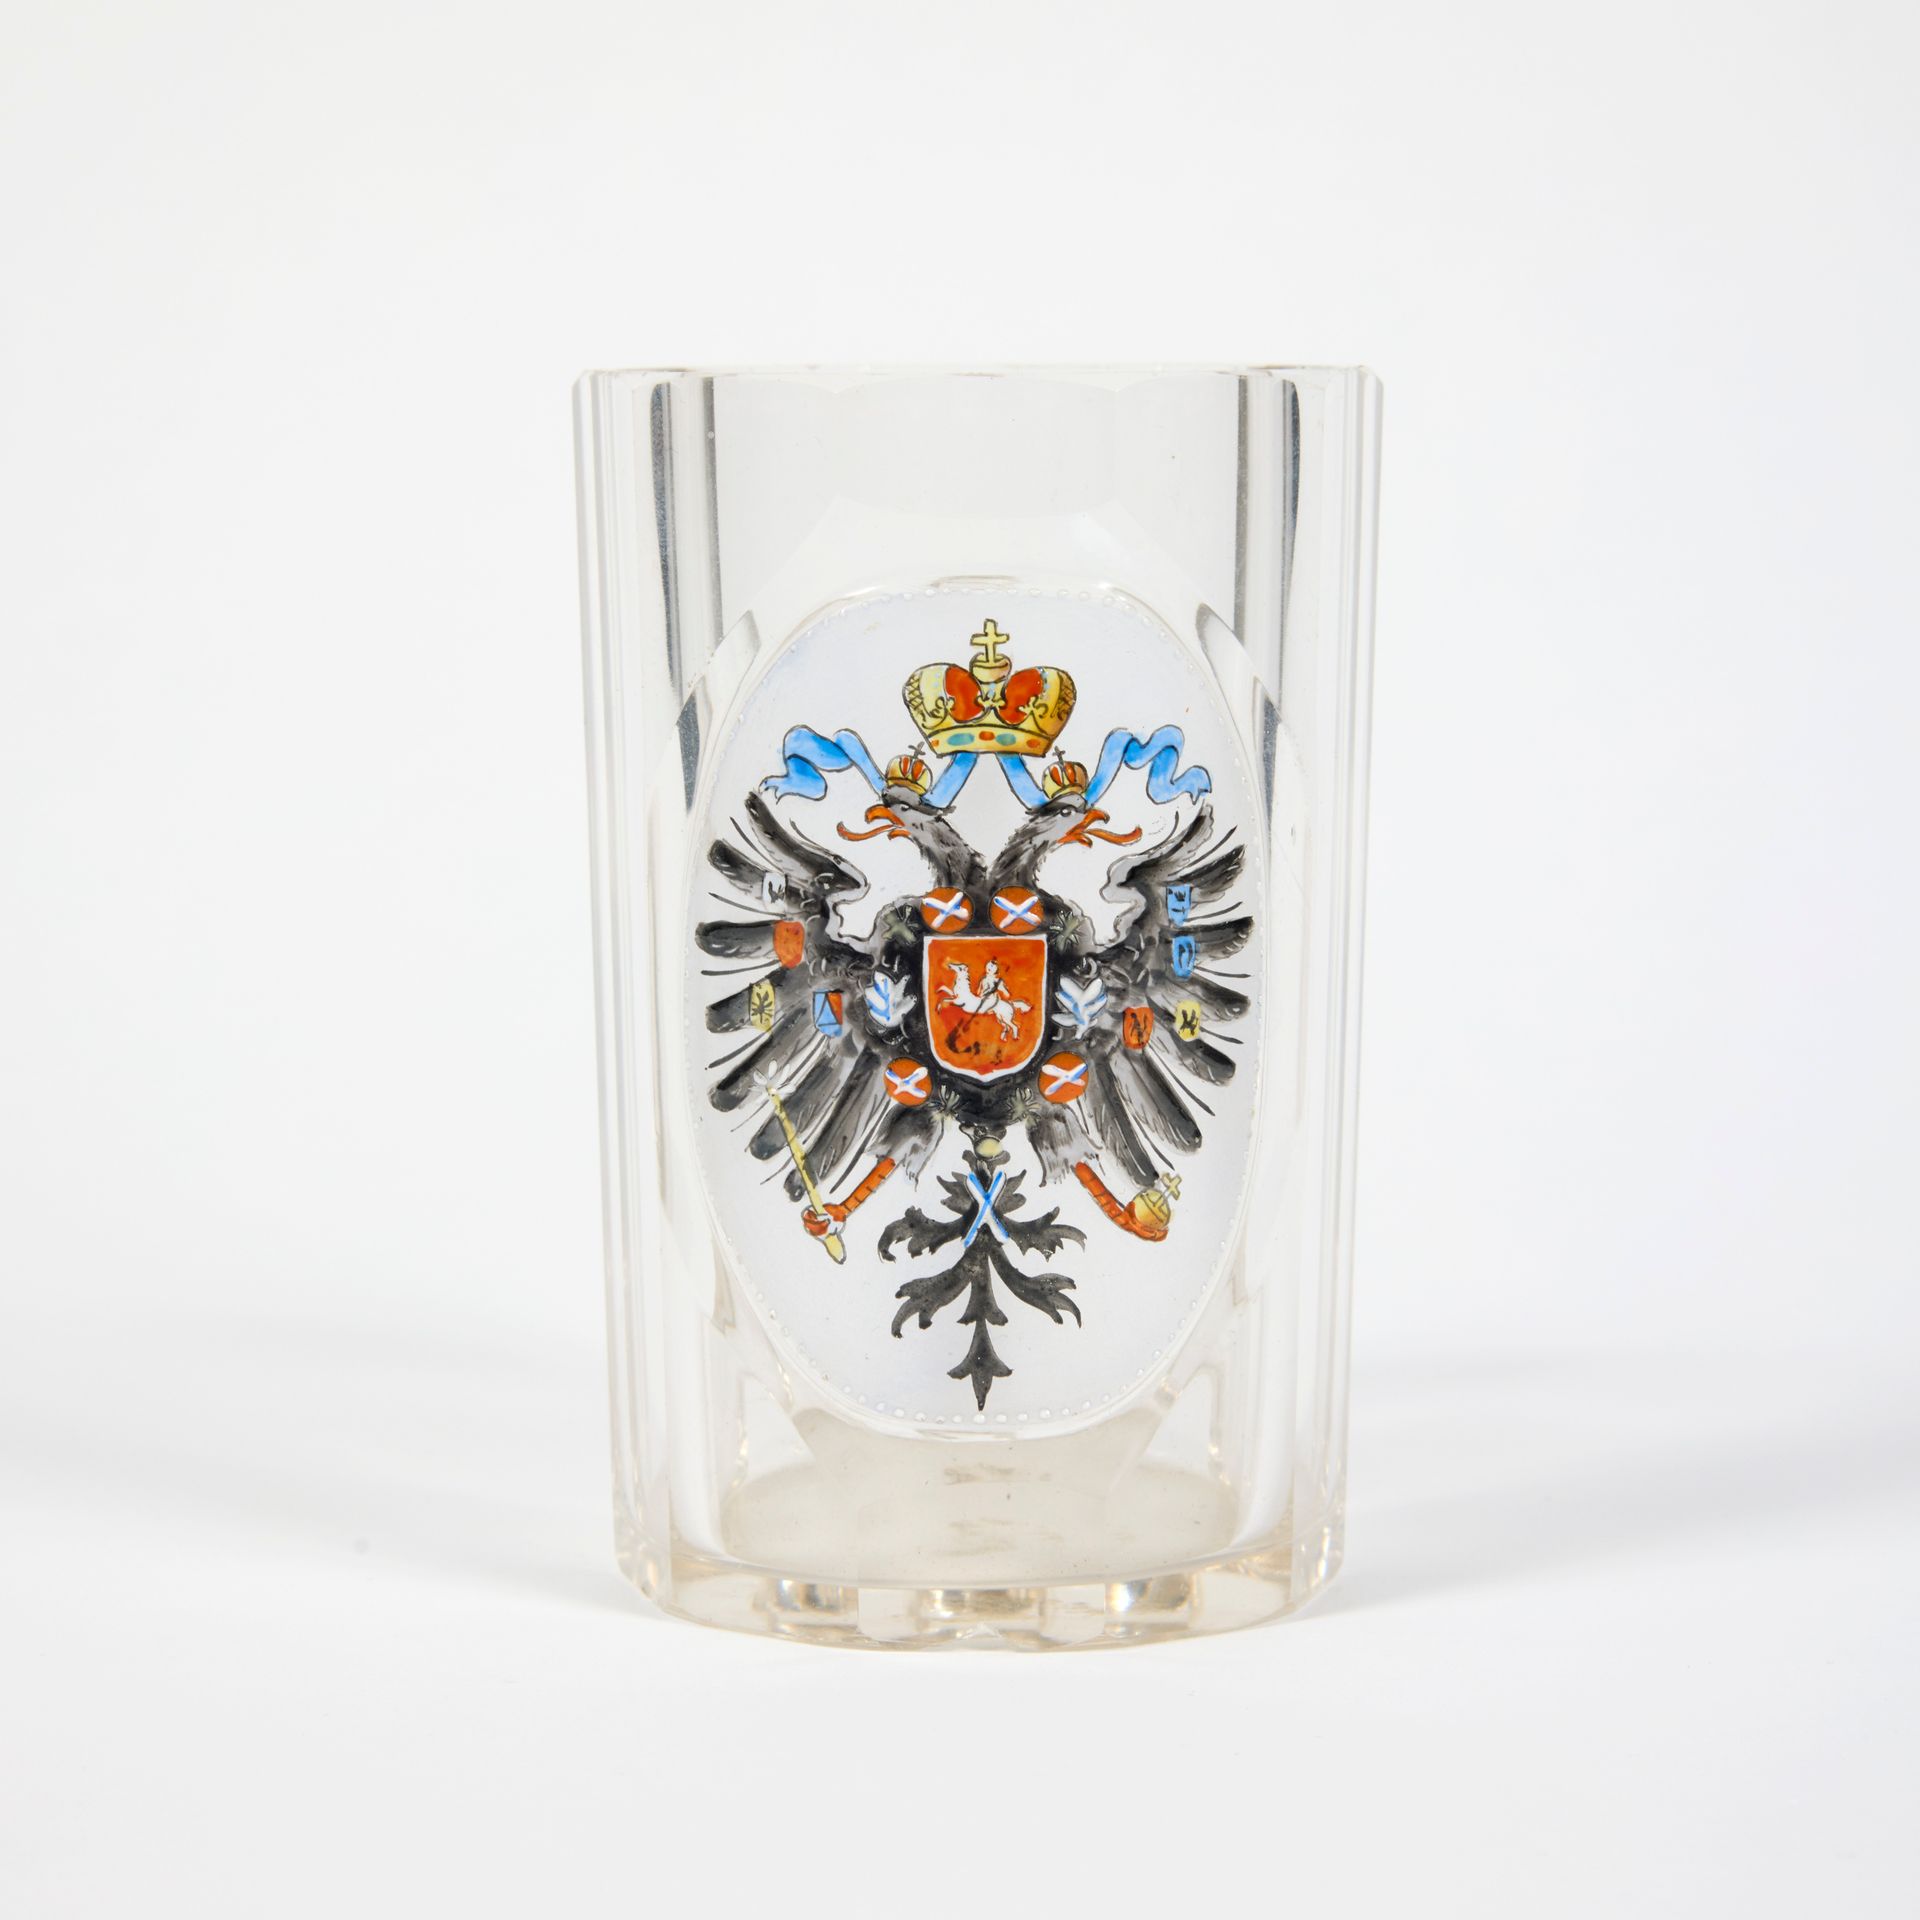 Null CUP
Decorated with a double-headed eagle
Cut, engraved and painted glass 
H&hellip;